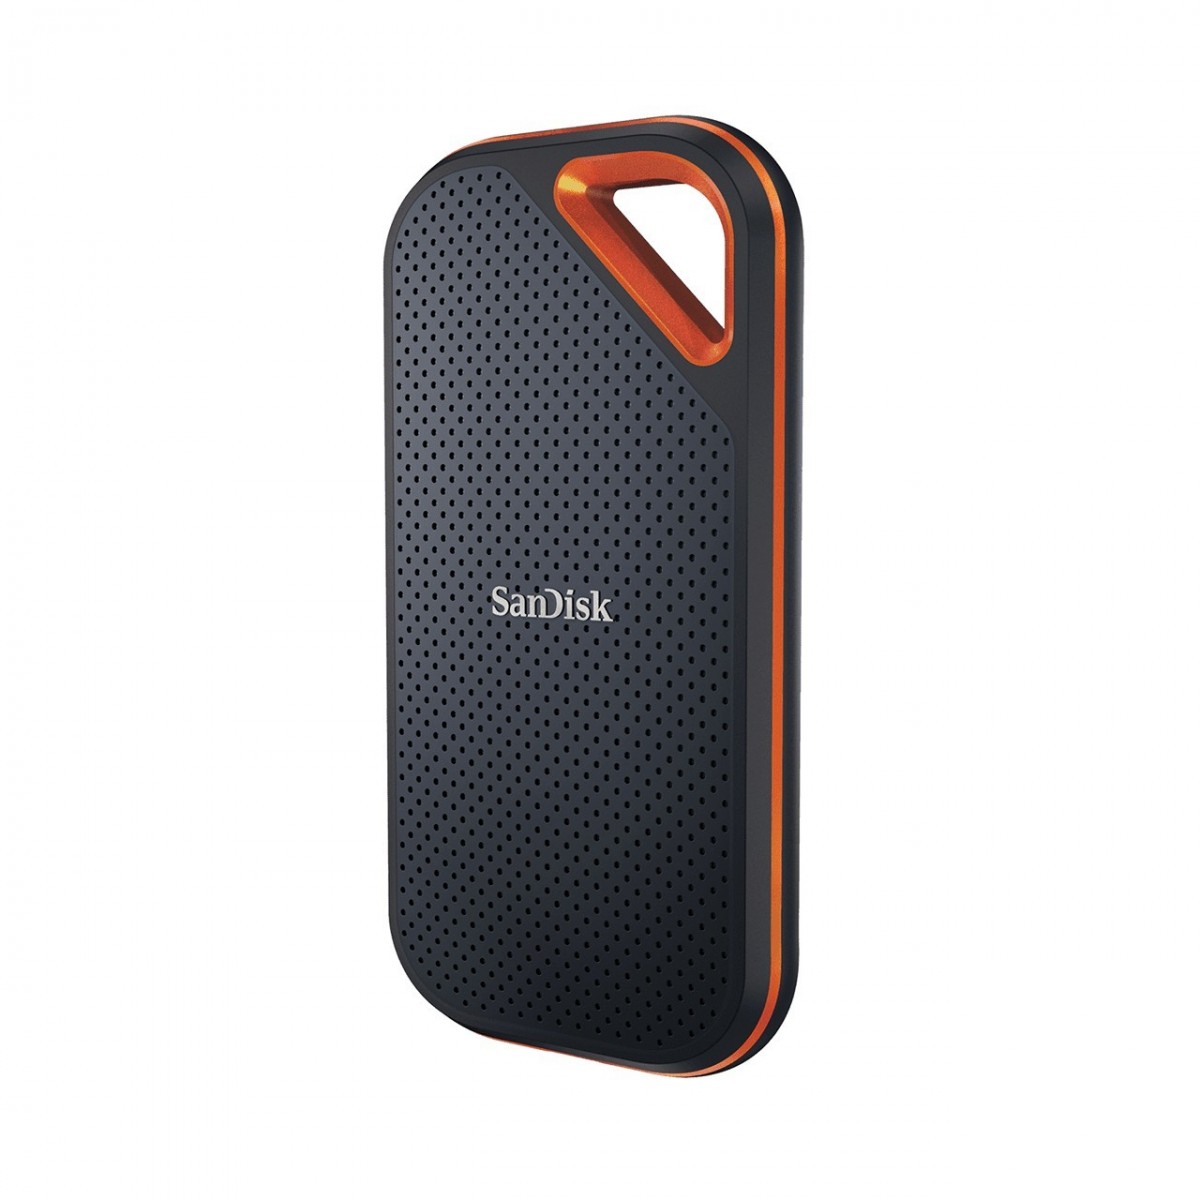 WD SanDisk Extreme Pro Portable SSD 2000MB - Solid State Disk - 2 GB